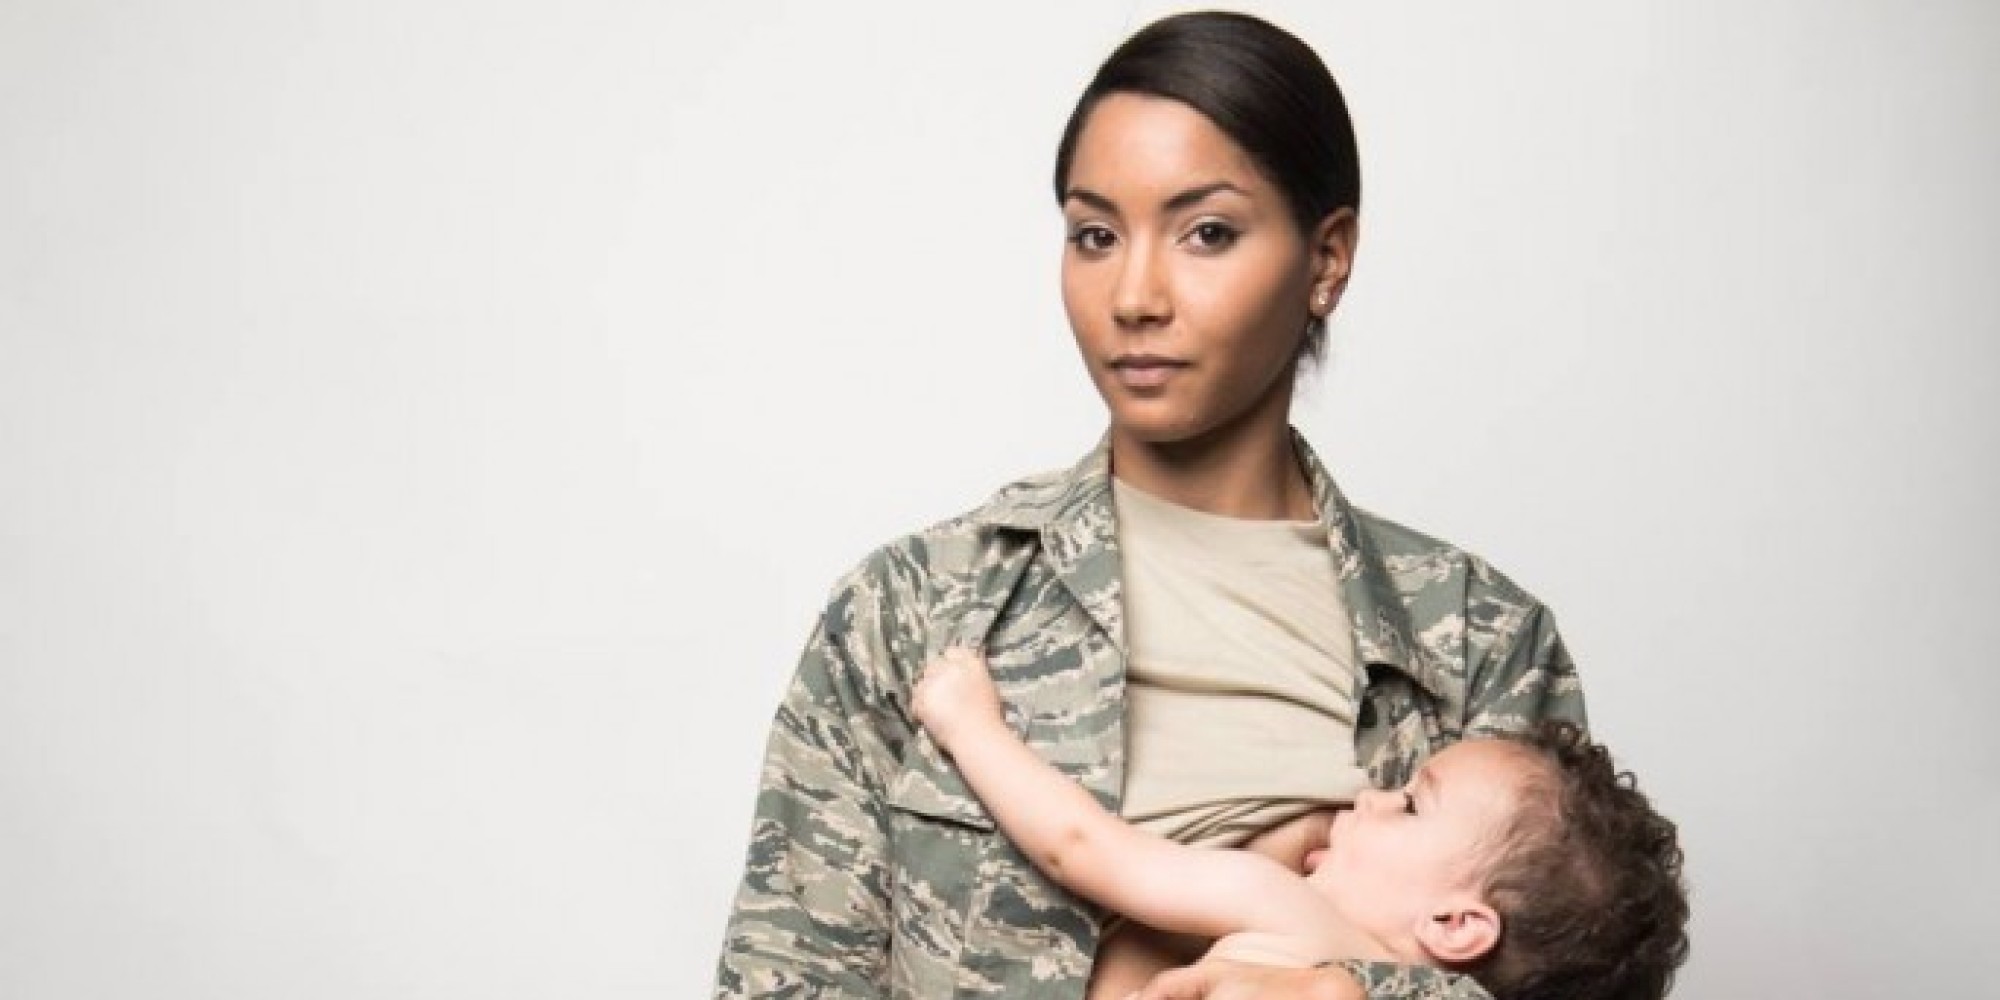 Air Force Mom Breastfeeding In Uniform Is A Stunning Look At Military